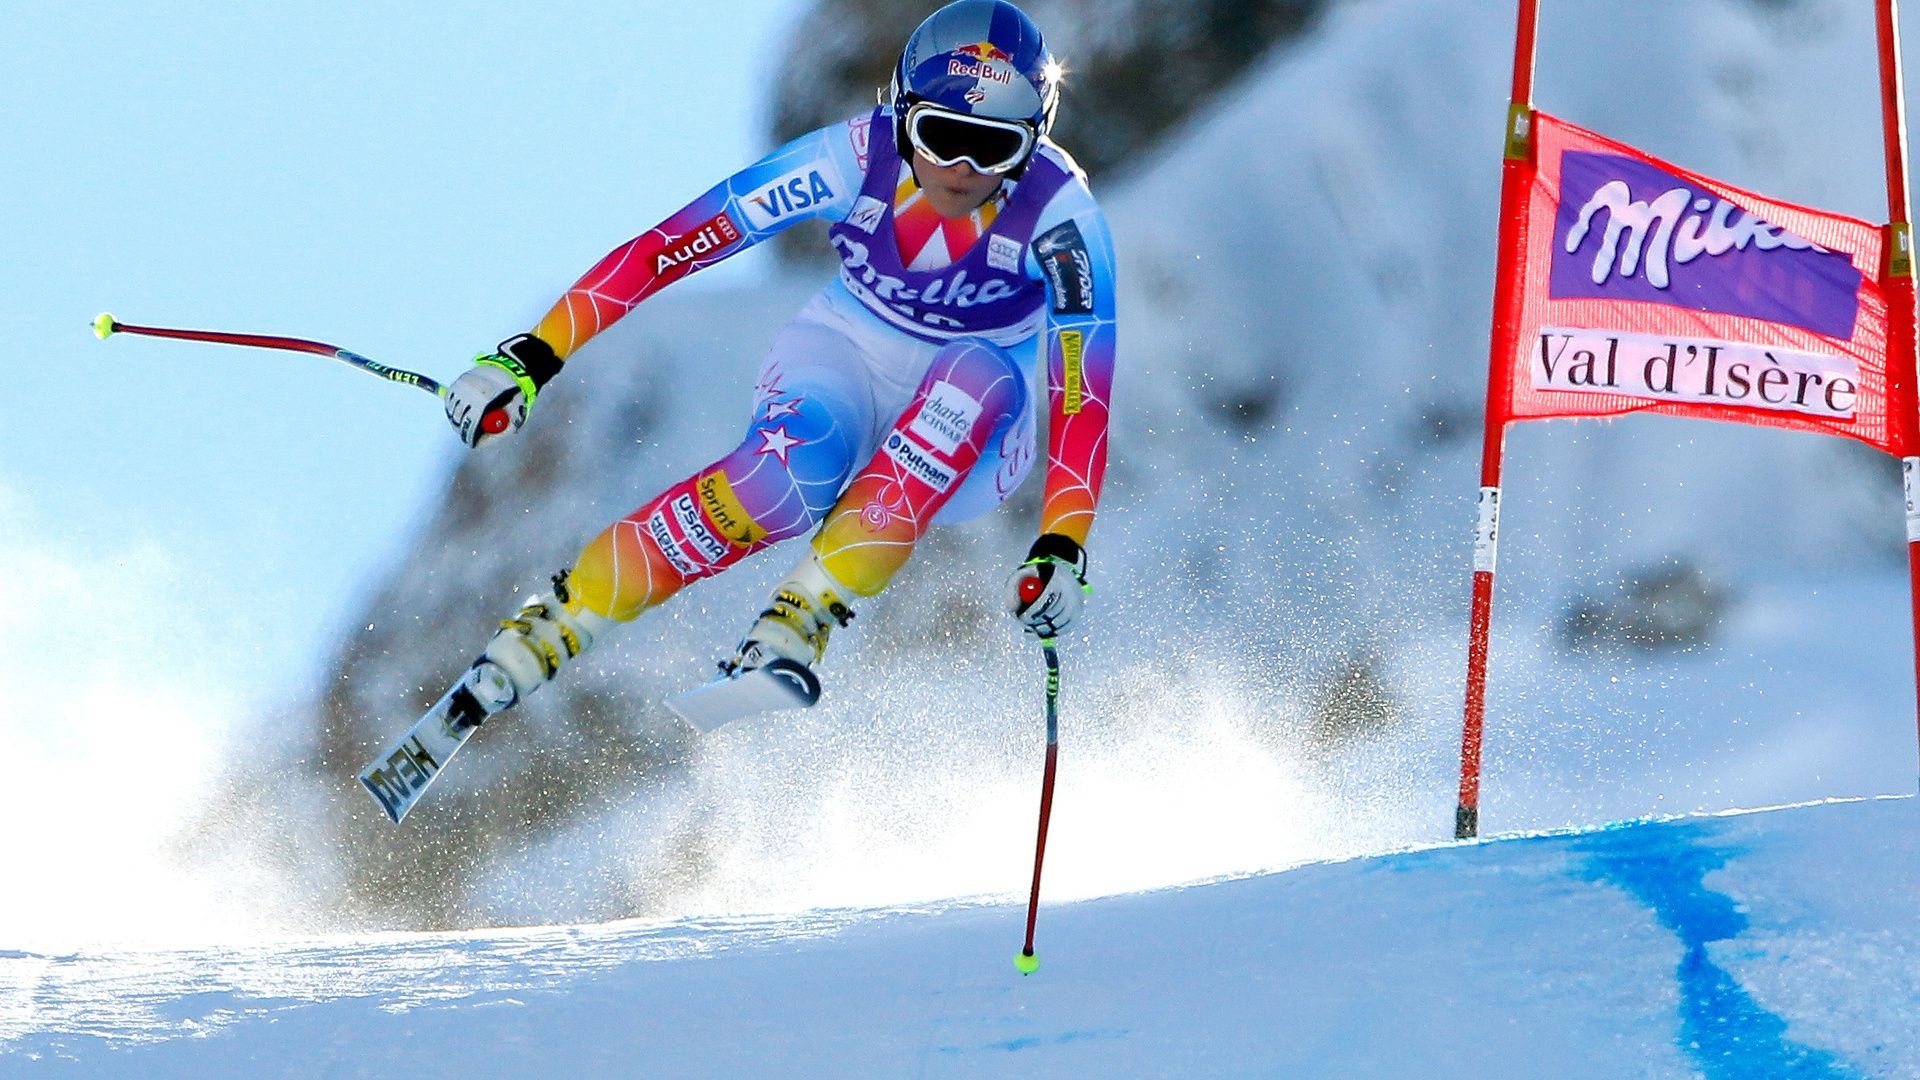 Slalom: Ski Racing, Extreme sports, Passing the distance on a snow track. 1920x1080 Full HD Background.